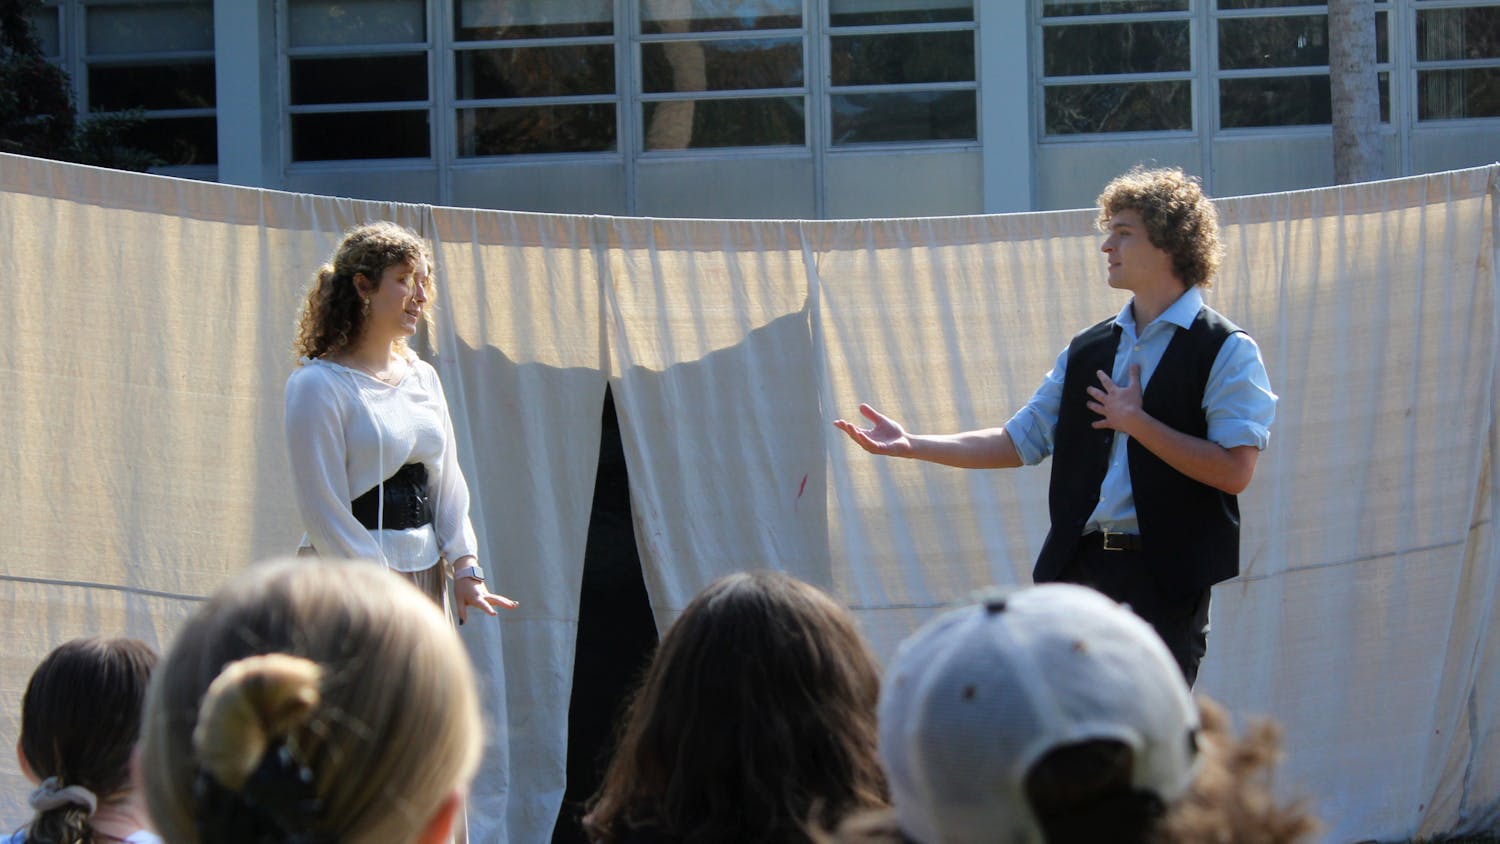 Makena Vargo (left) and James Bilderback (right) act out a scene from Shakespeare’s Romeo and Juliet on the Reitz Union North Lawn during the event hosted by UF Shakespeare in the Park on Sunday, Dec. 5, 2021.